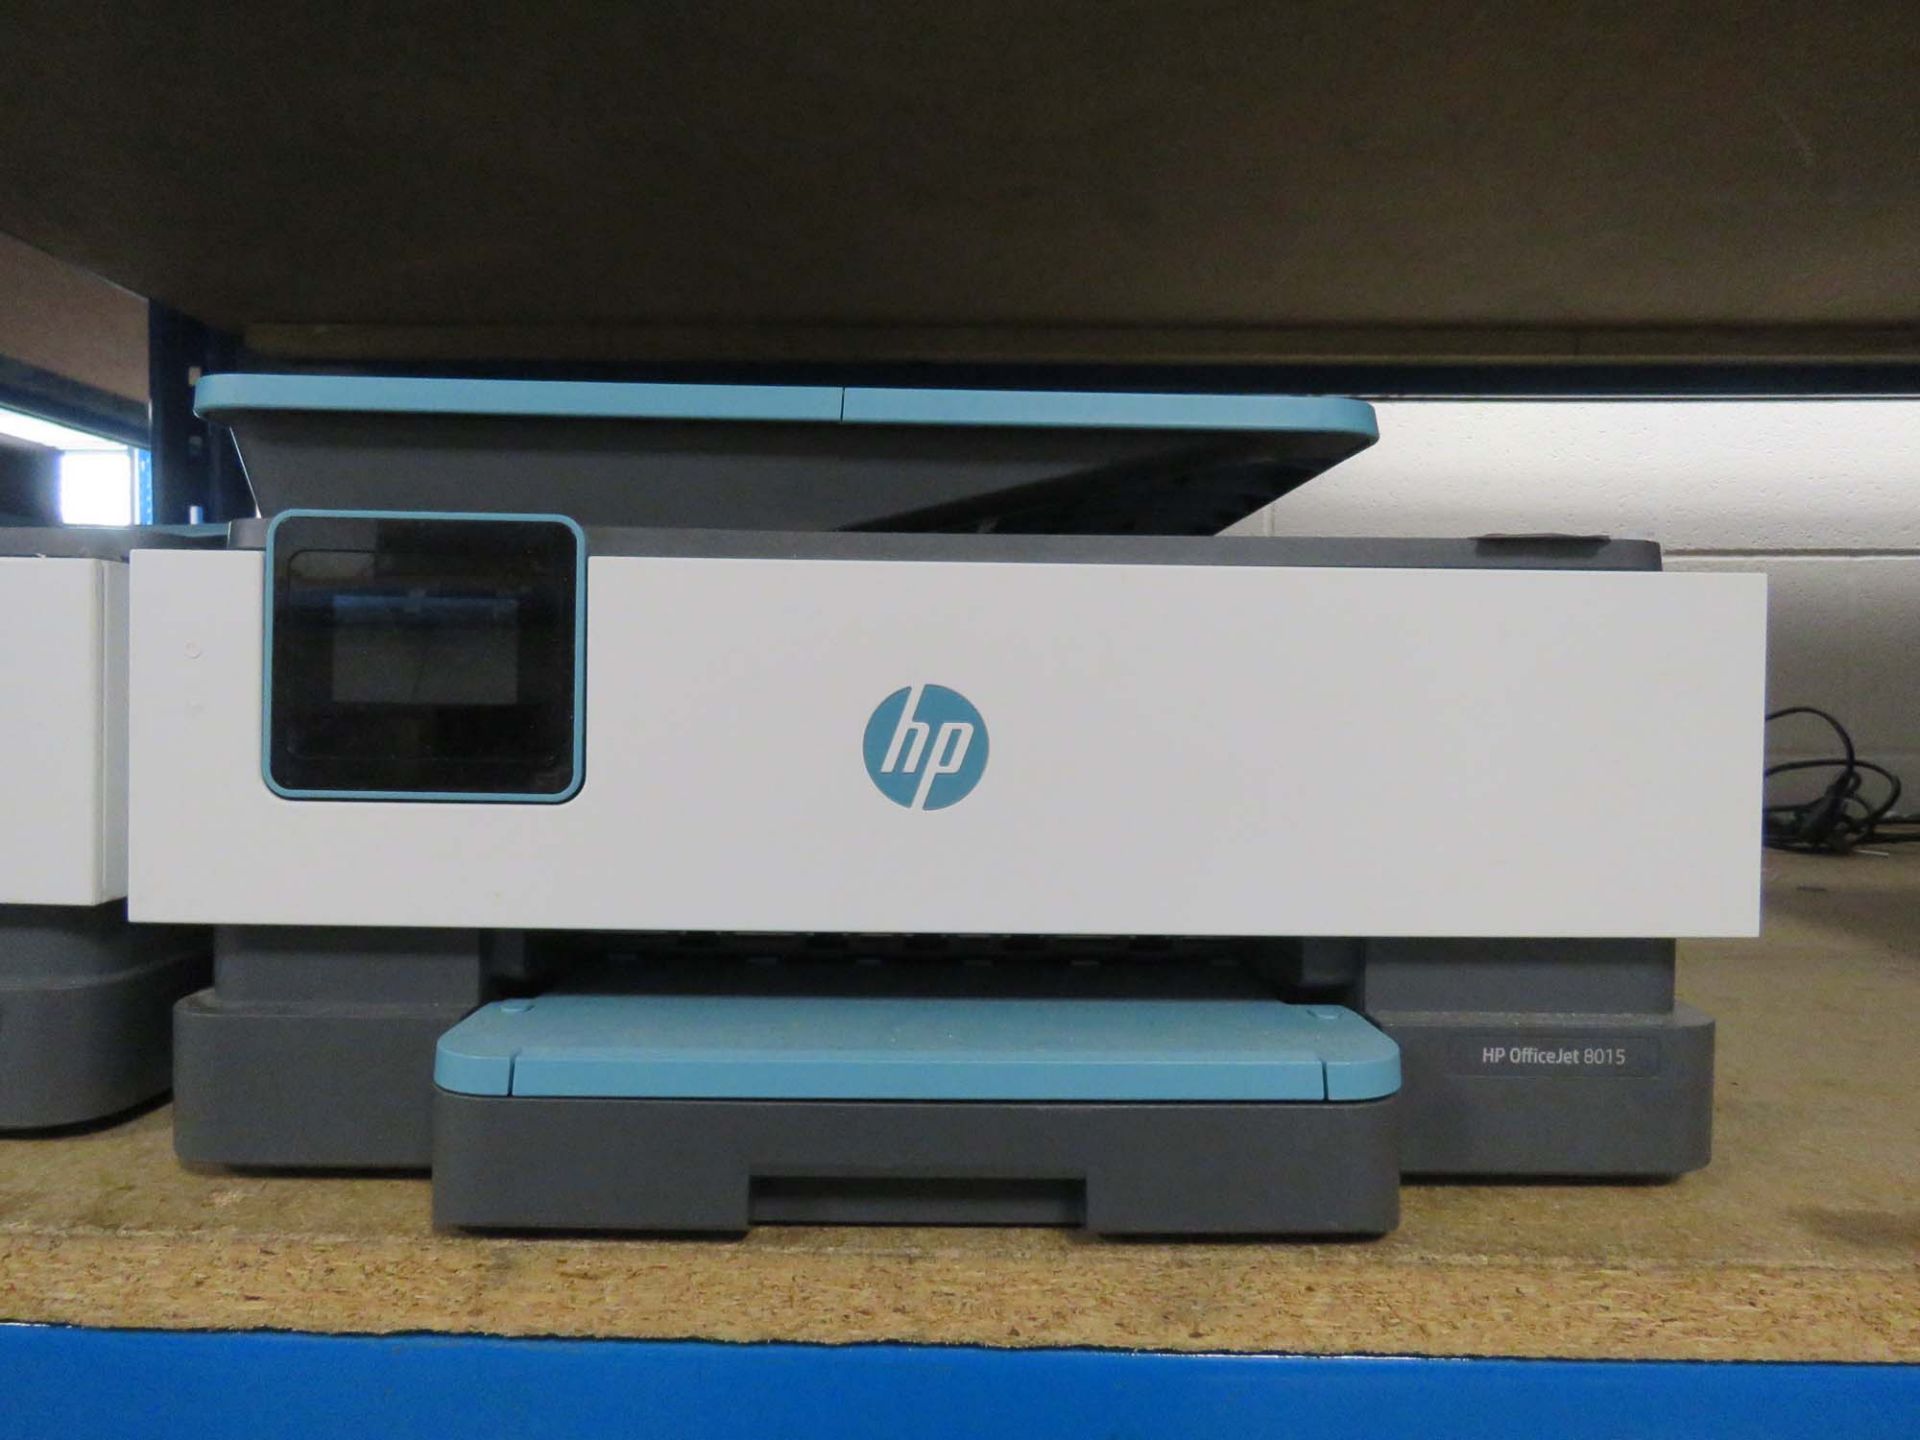 2359 - HP OfficeJet 8015 all in one printer